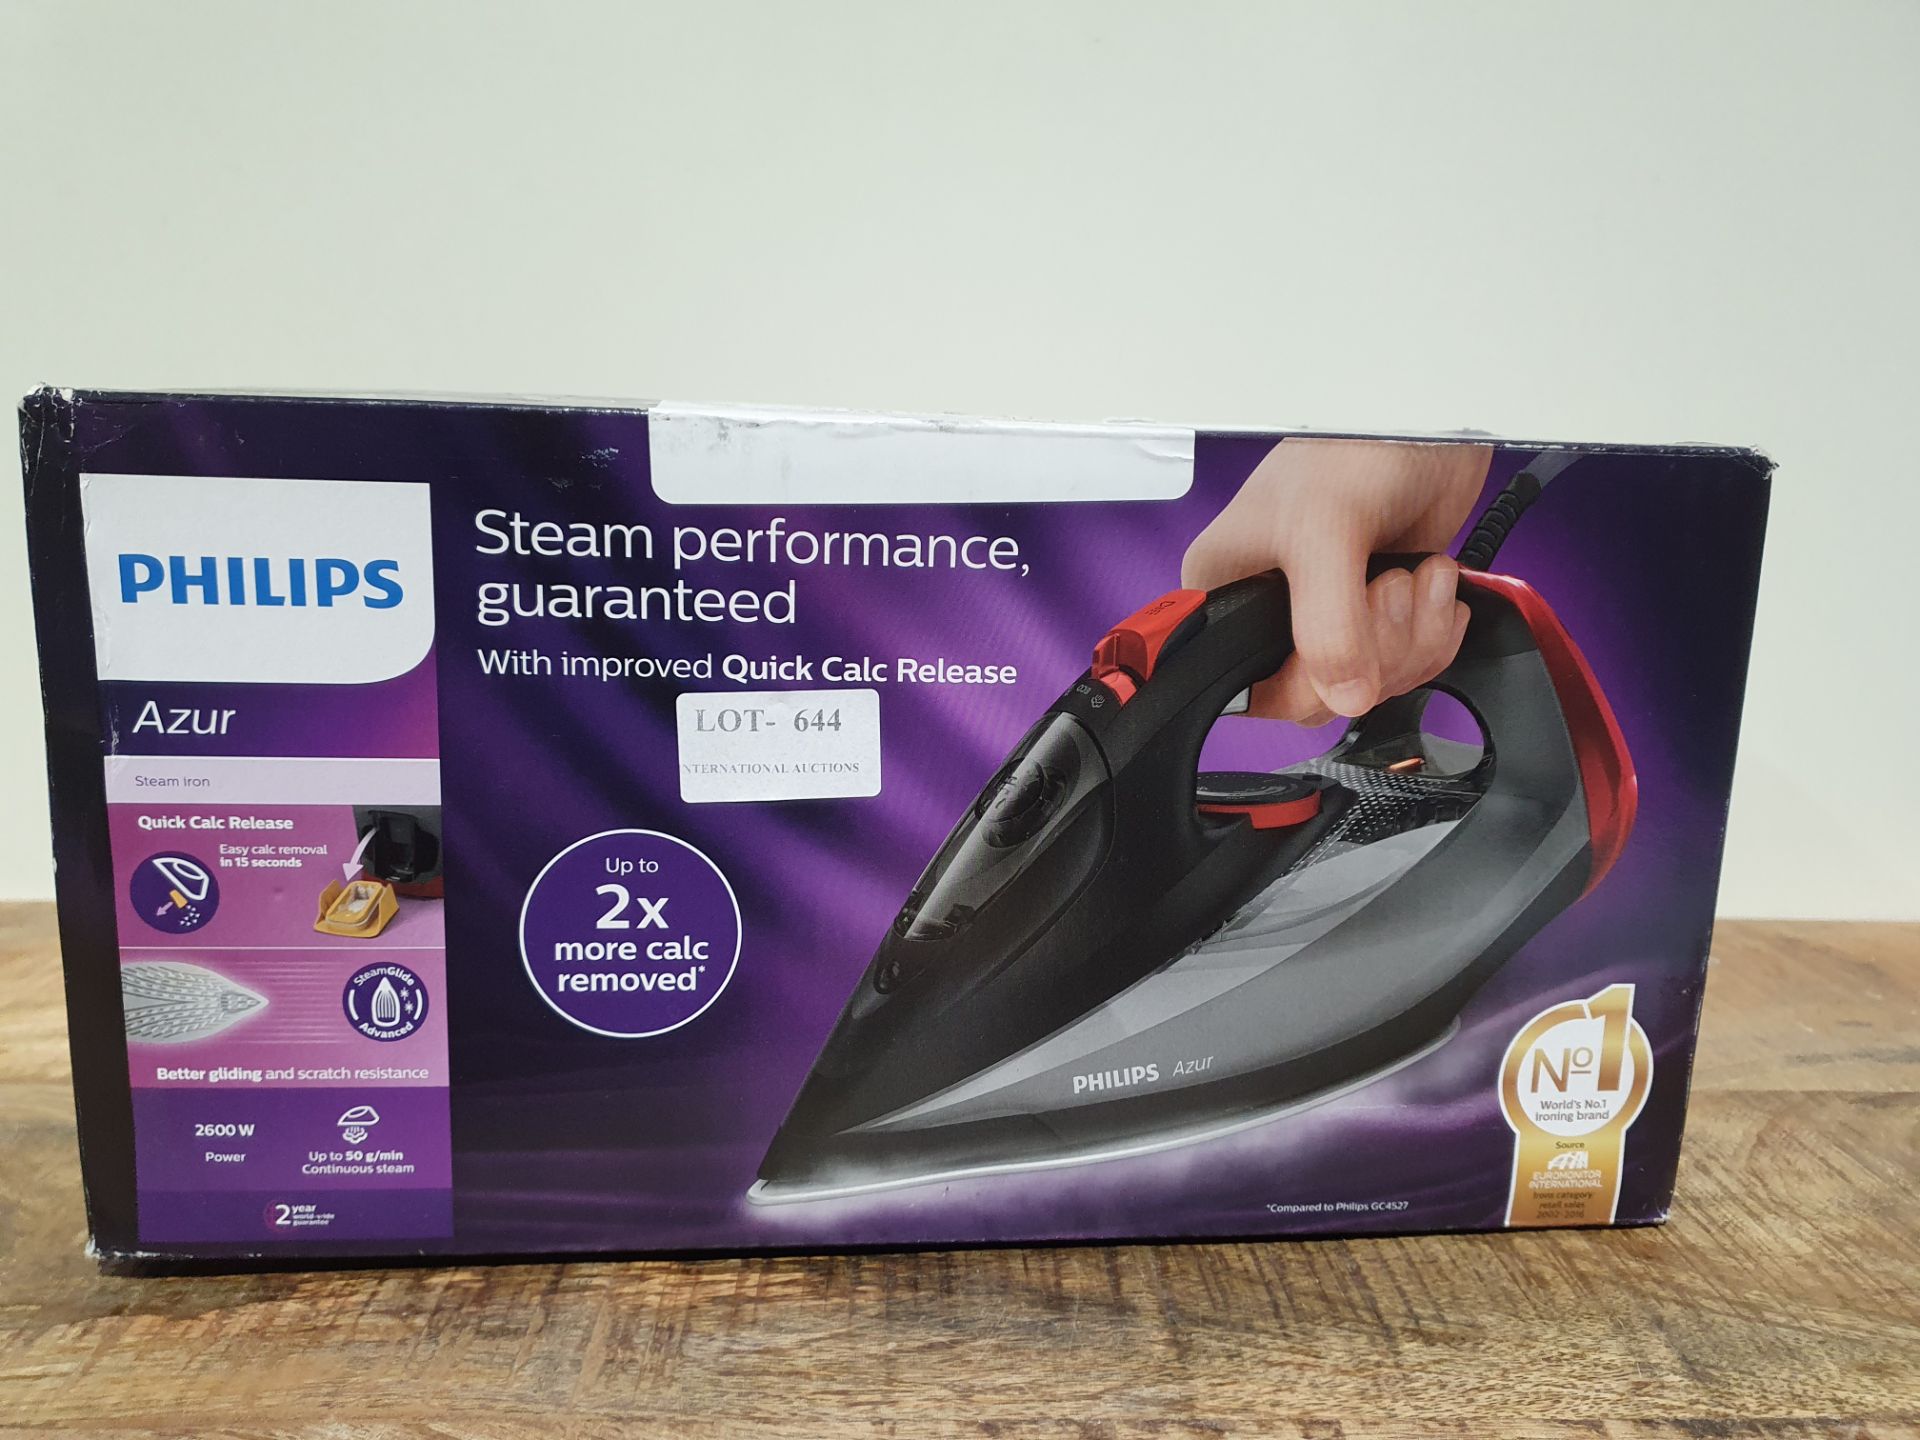 PHILIPS AZUR STEAM IRONCondition ReportAppraisal Available on Request - All Items are Unchecked/